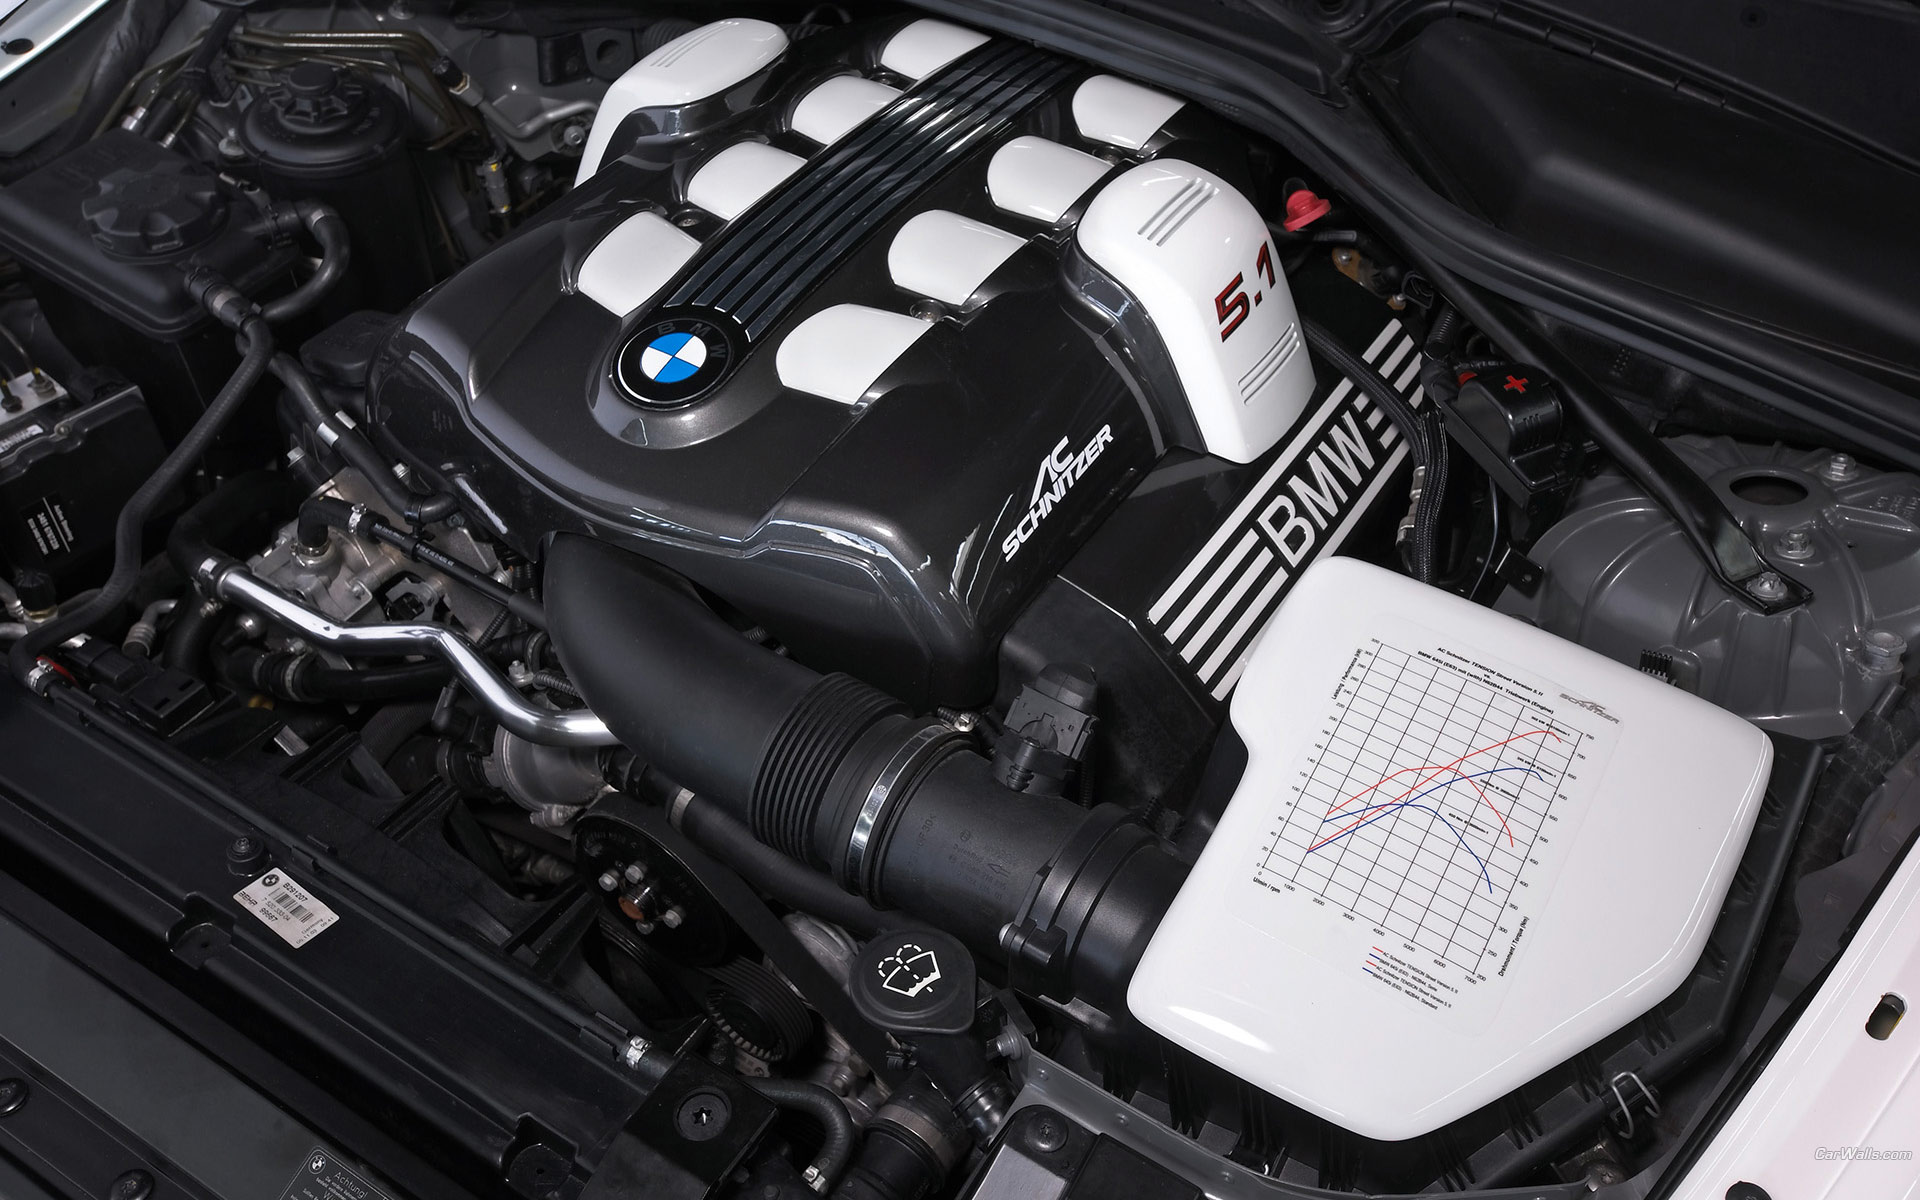 Download full size 6 tension engine Bmw wallpaper / 1920x1200